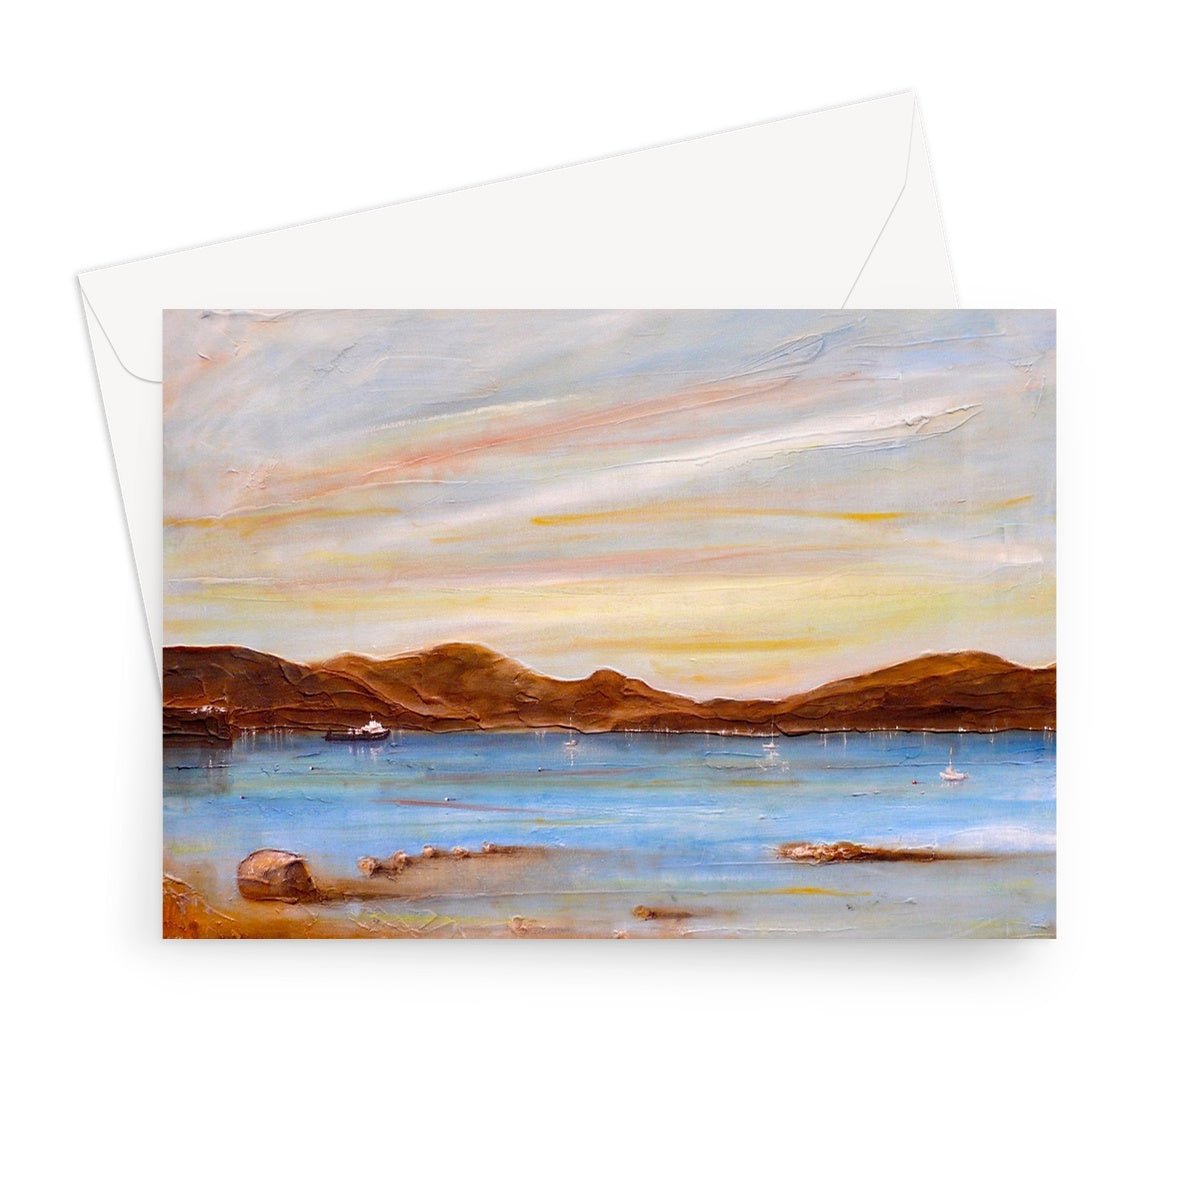 The Last Ferry To Dunoon Art Gifts Greeting Card-Greetings Cards-River Clyde Art Gallery-7"x5"-10 Cards-Paintings, Prints, Homeware, Art Gifts From Scotland By Scottish Artist Kevin Hunter